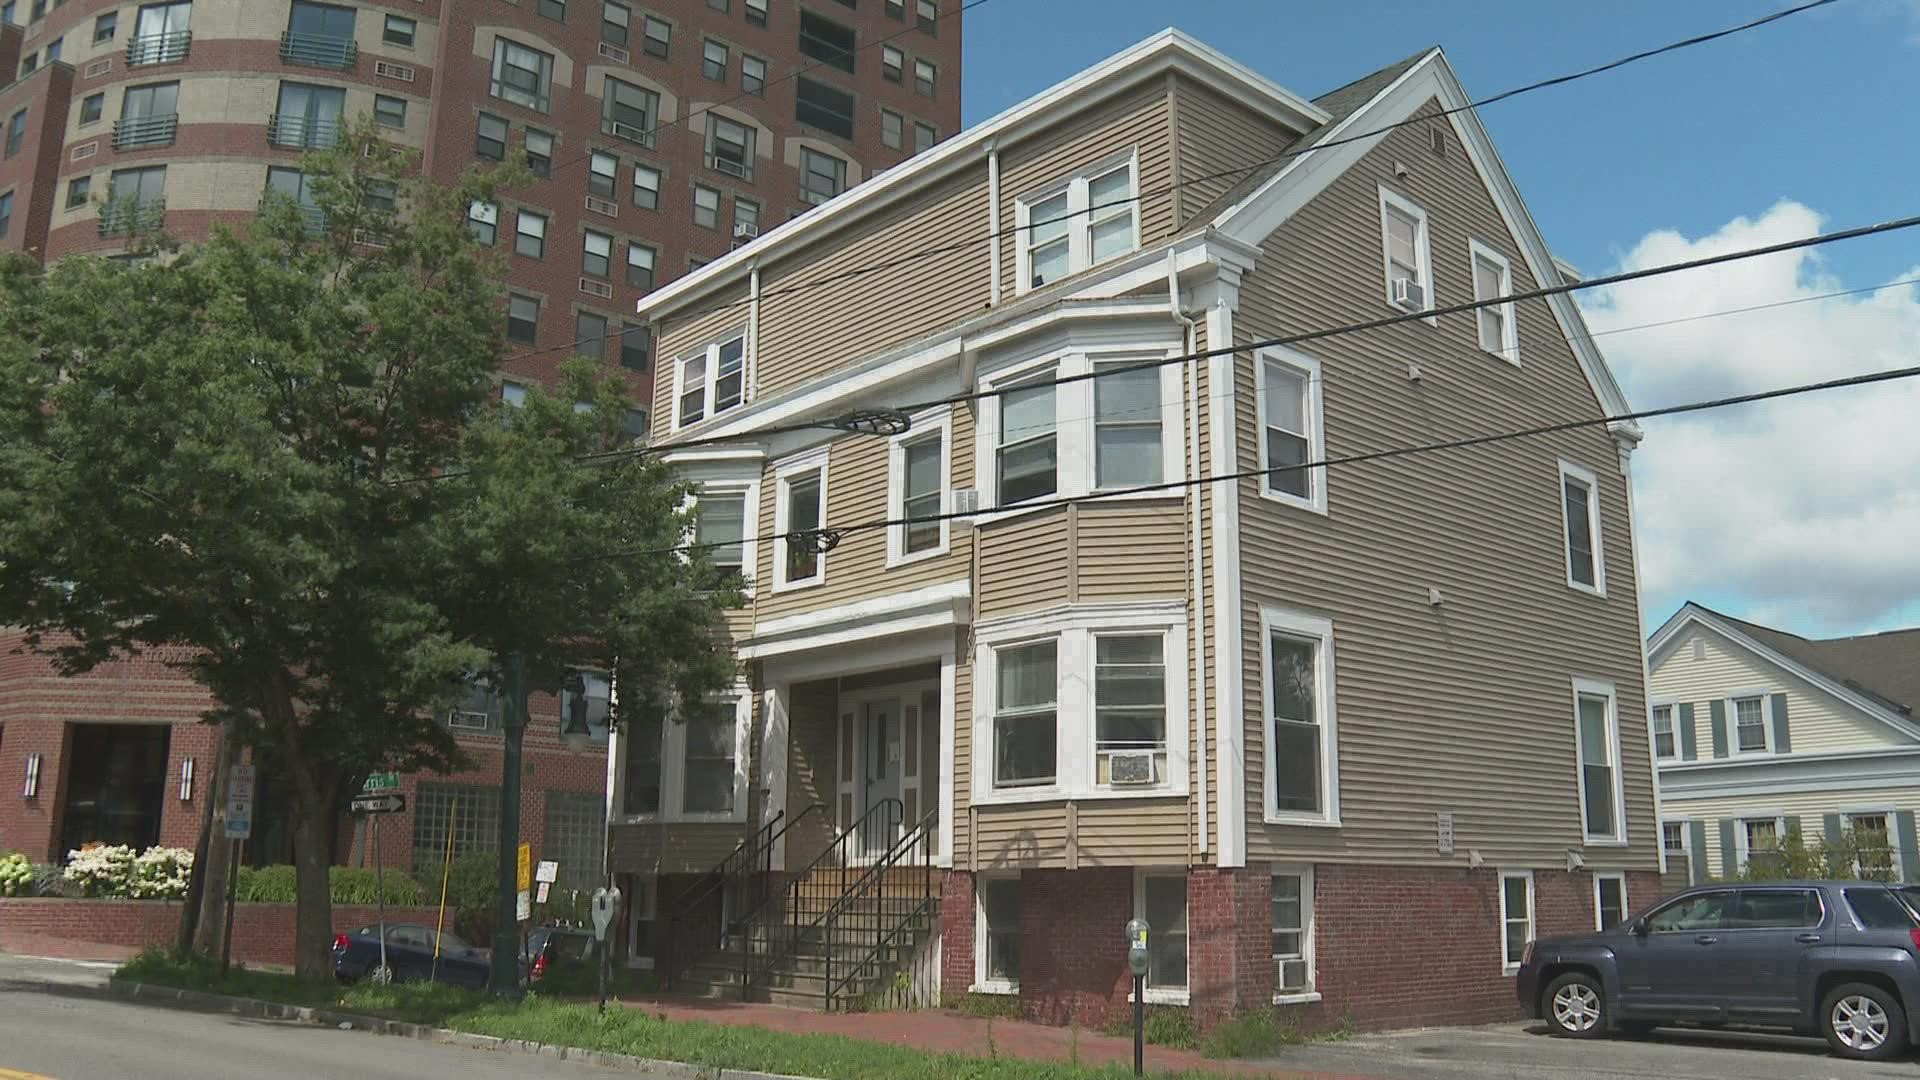 The Maine State Housing Authority has $152 million in this most recent round of funding from the American Rescue Plan to give to tenants to pay landlords.